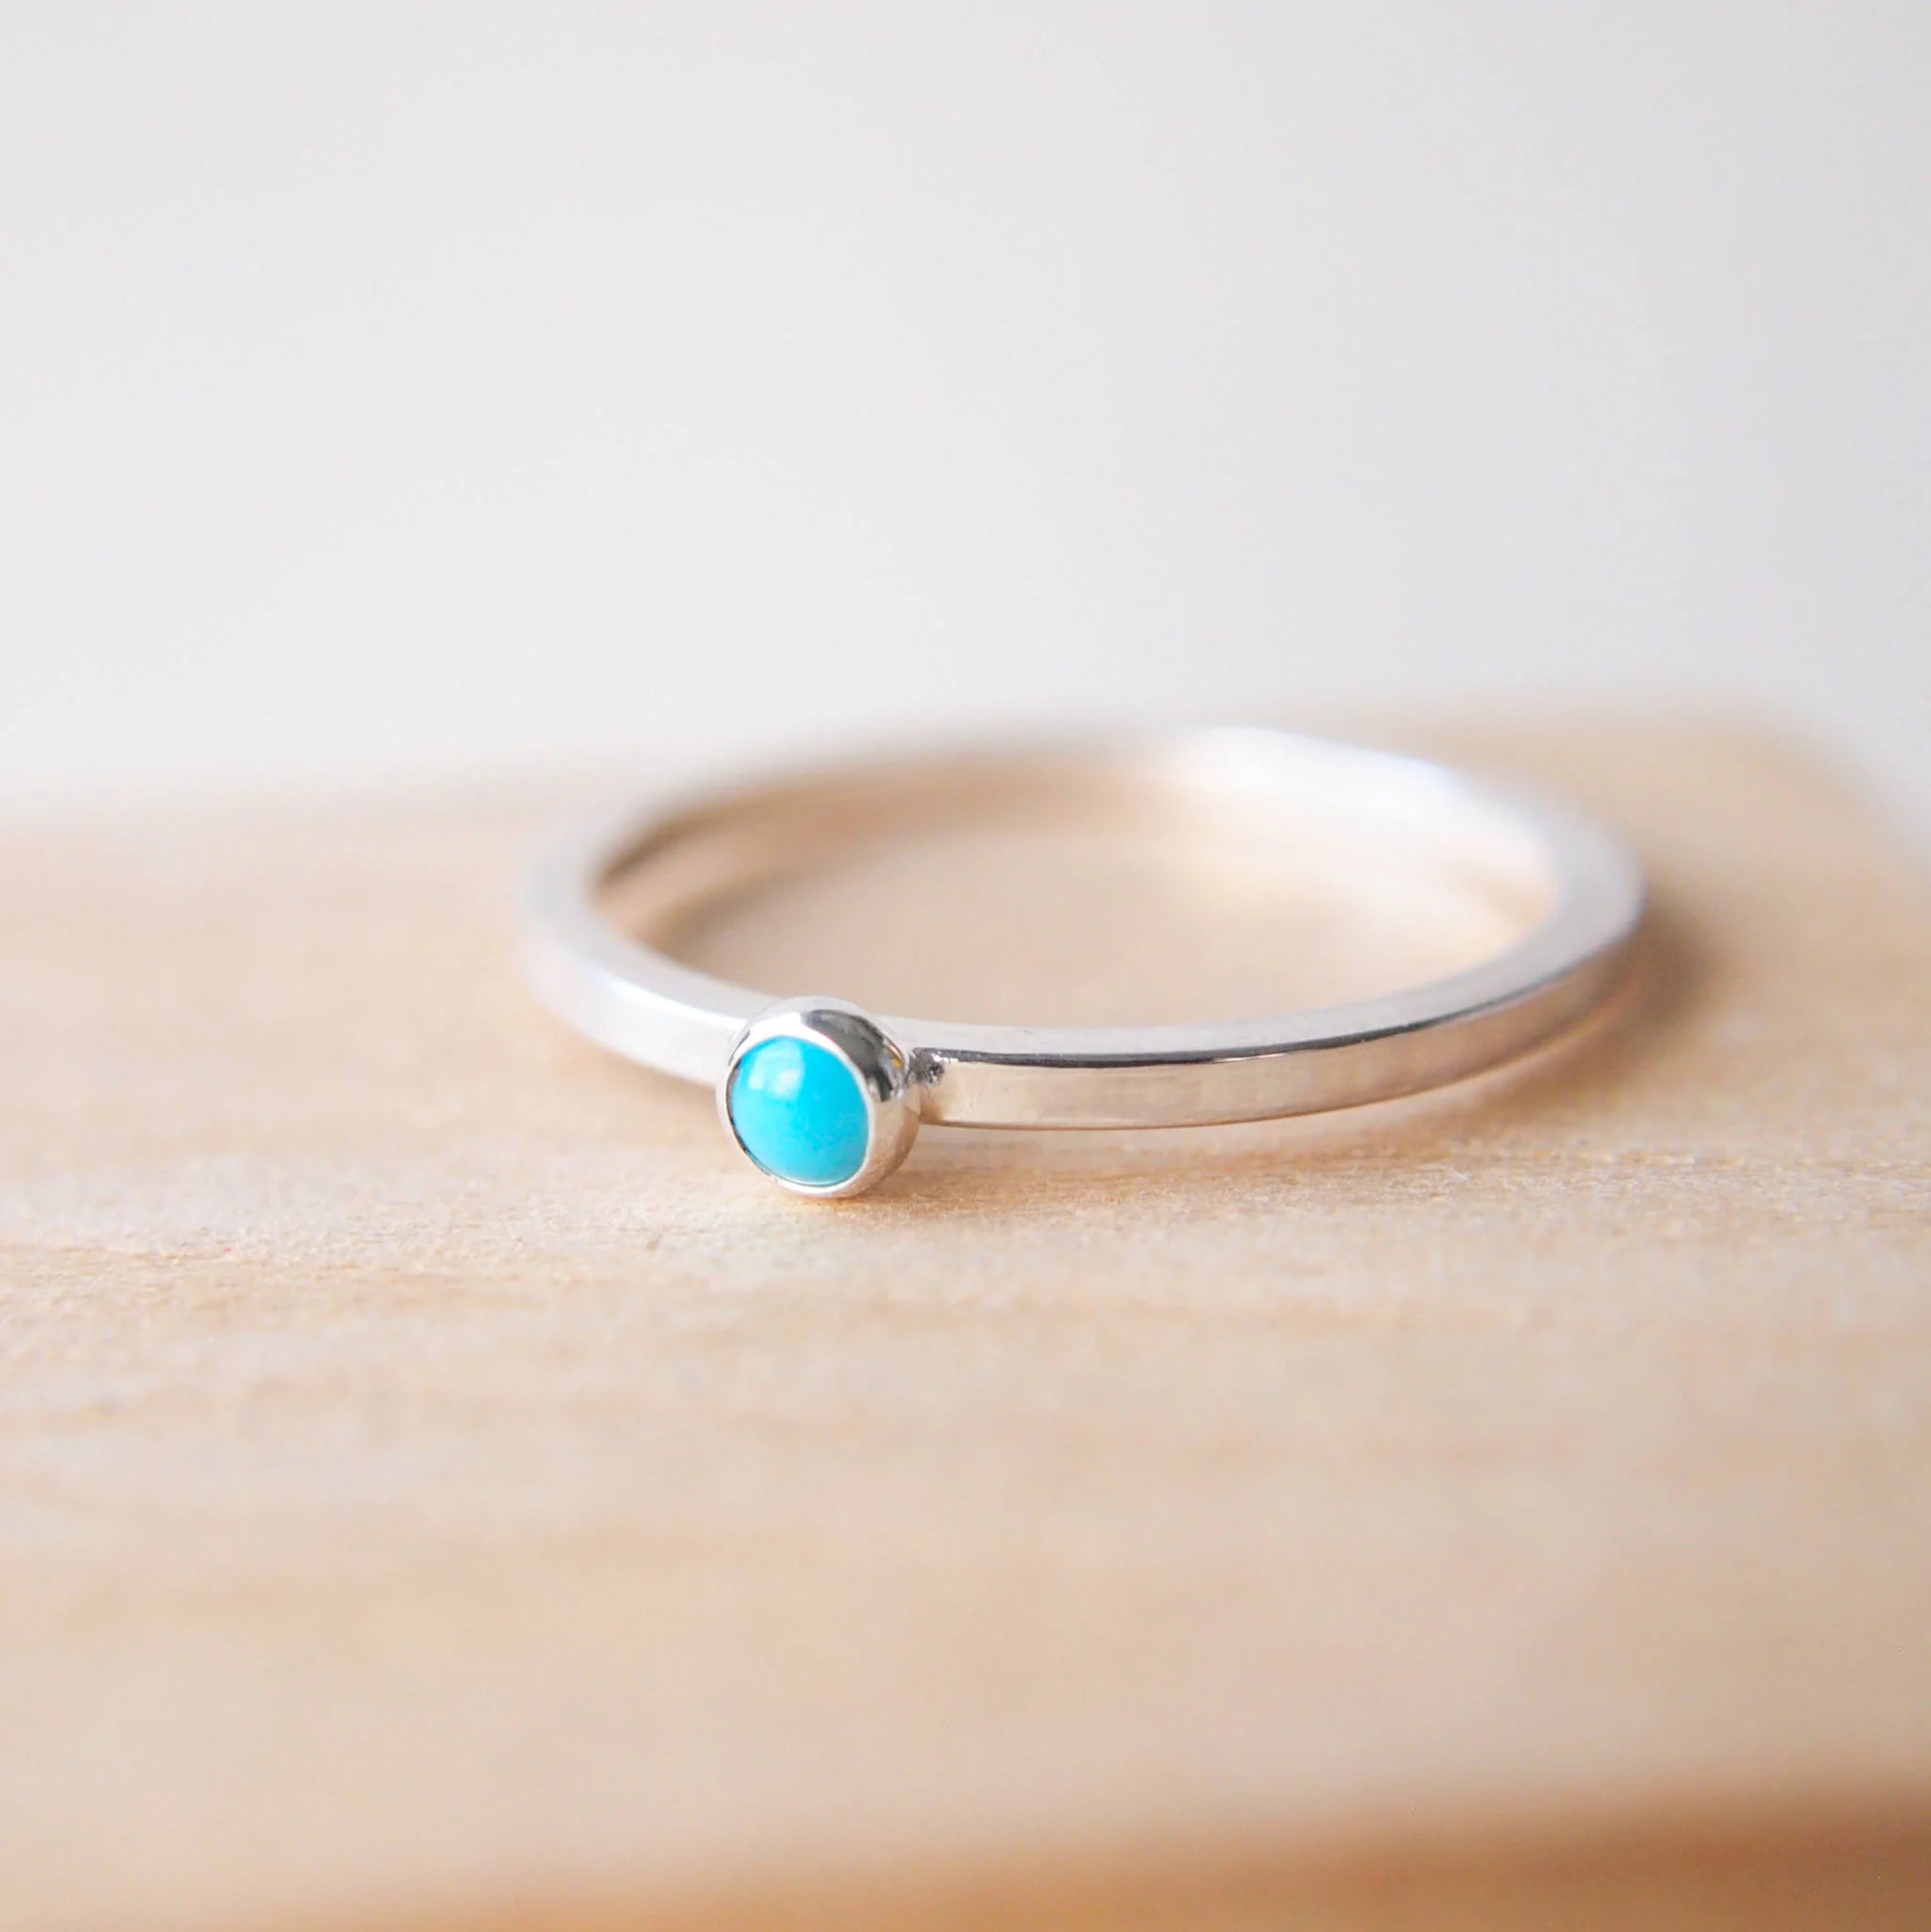 Sterling Silver and turquoise cabochon ring with a small 3mm turquoise set onto a simple silver square band ring. Handmade in Scotland by maram jewellery